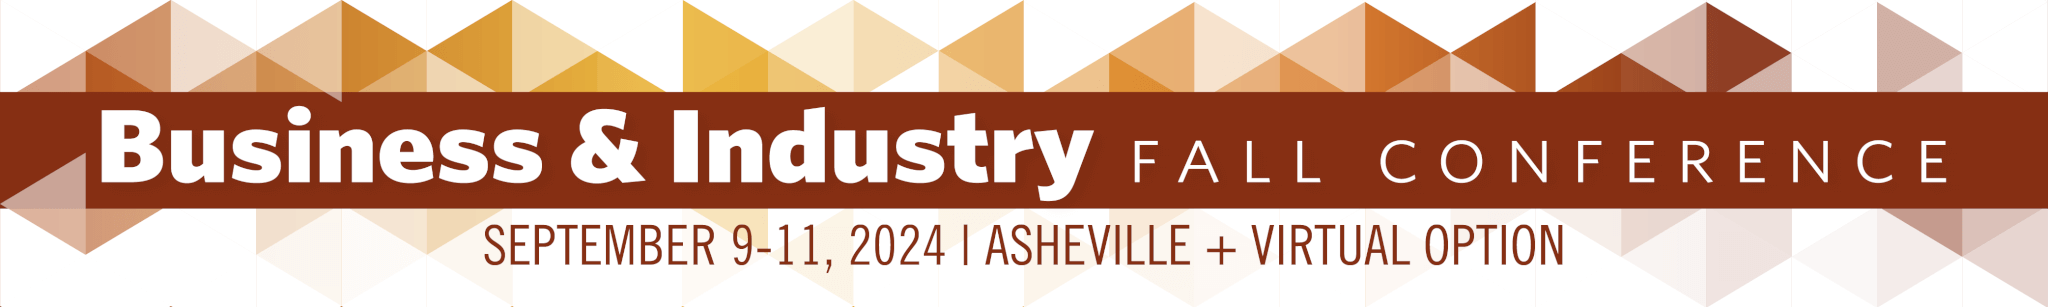 Business & Industry Fall Conference Header 2024